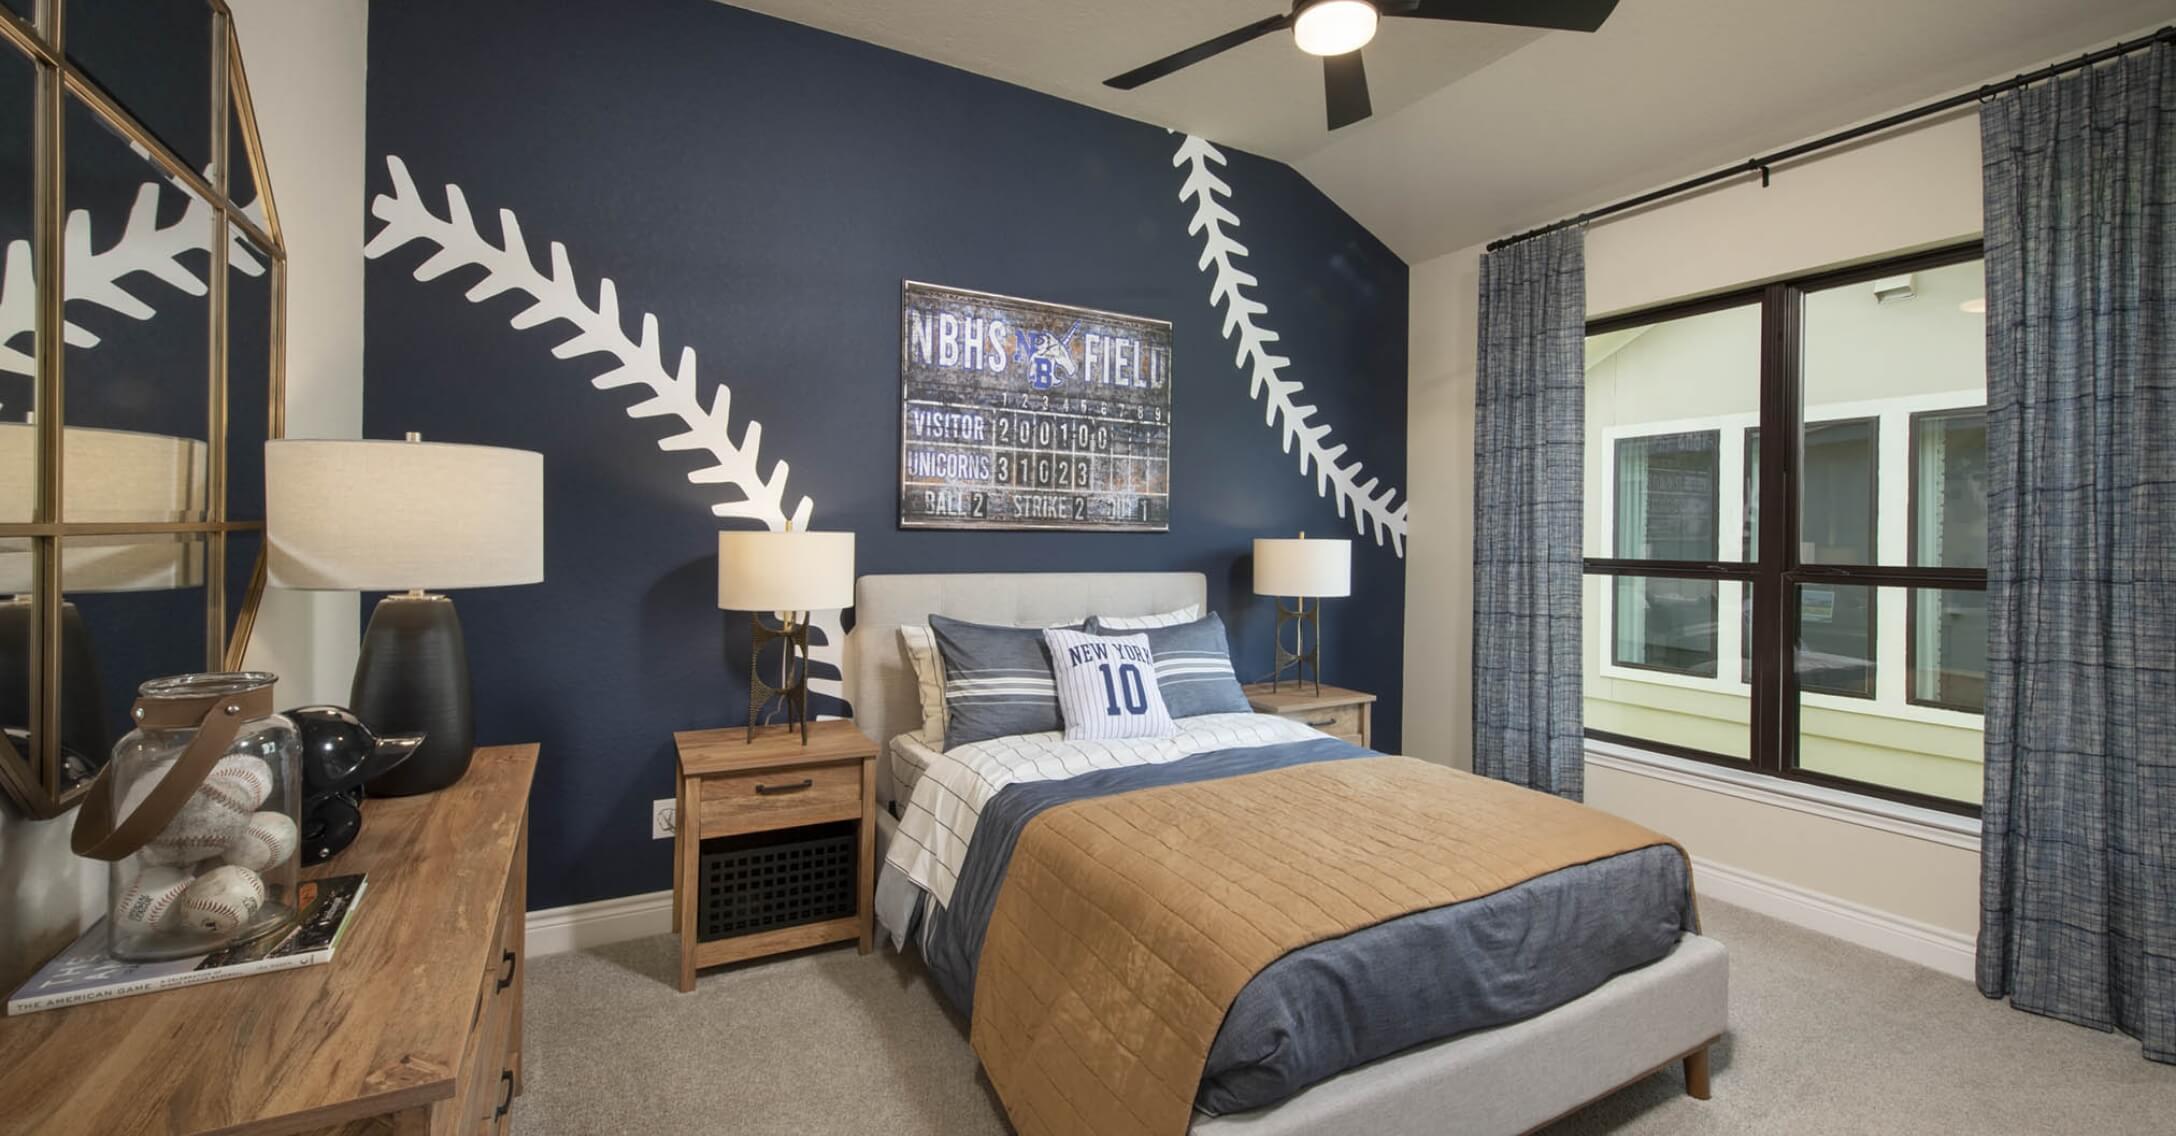 A baseball themed bedroom with blue walls in a Mayfair home.